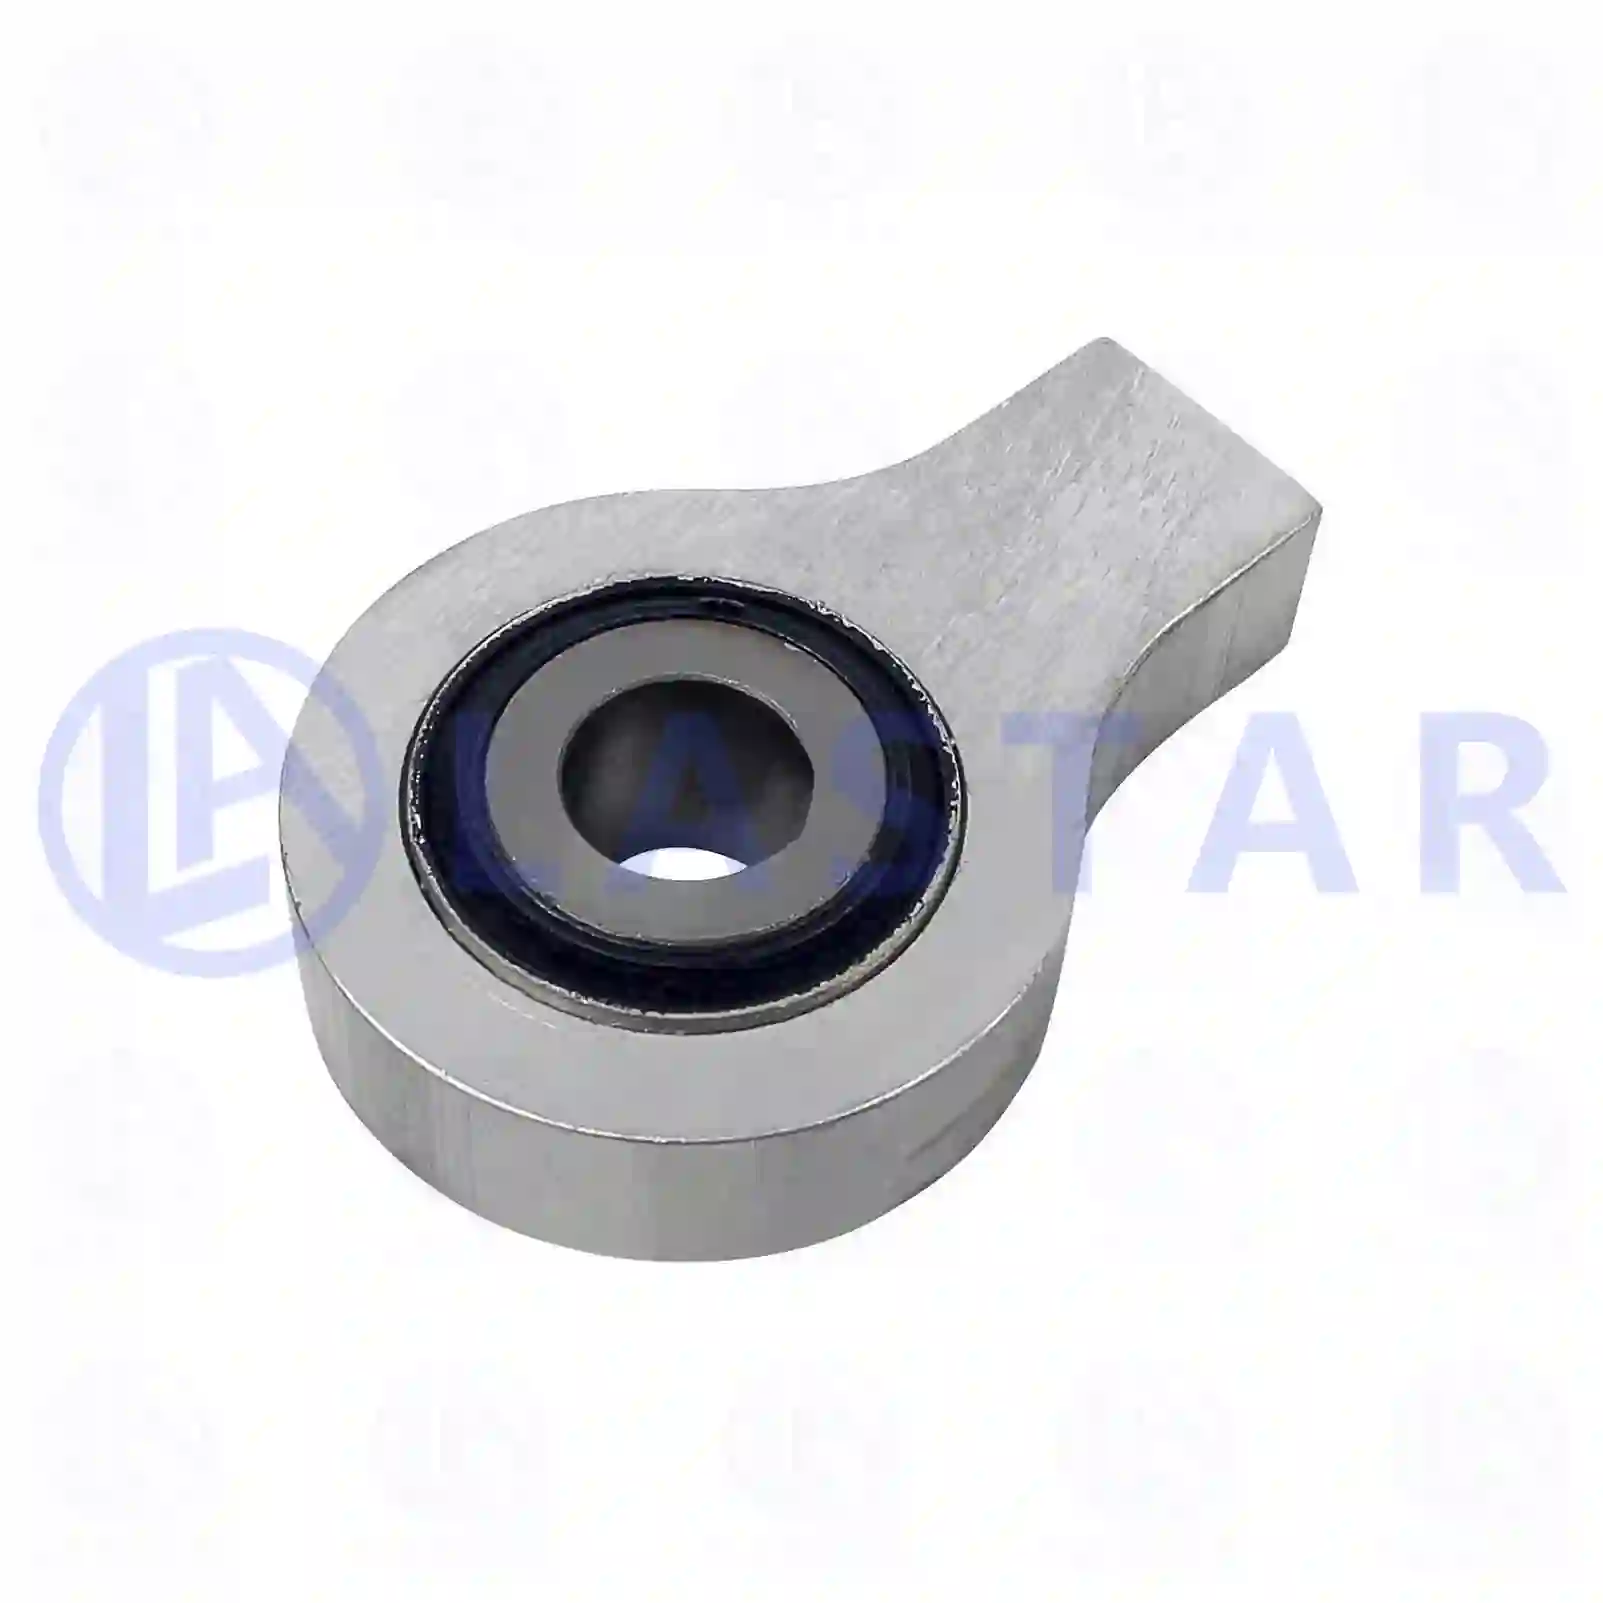 Bearing joint, 77734777, 2285718 ||  77734777 Lastar Spare Part | Truck Spare Parts, Auotomotive Spare Parts Bearing joint, 77734777, 2285718 ||  77734777 Lastar Spare Part | Truck Spare Parts, Auotomotive Spare Parts